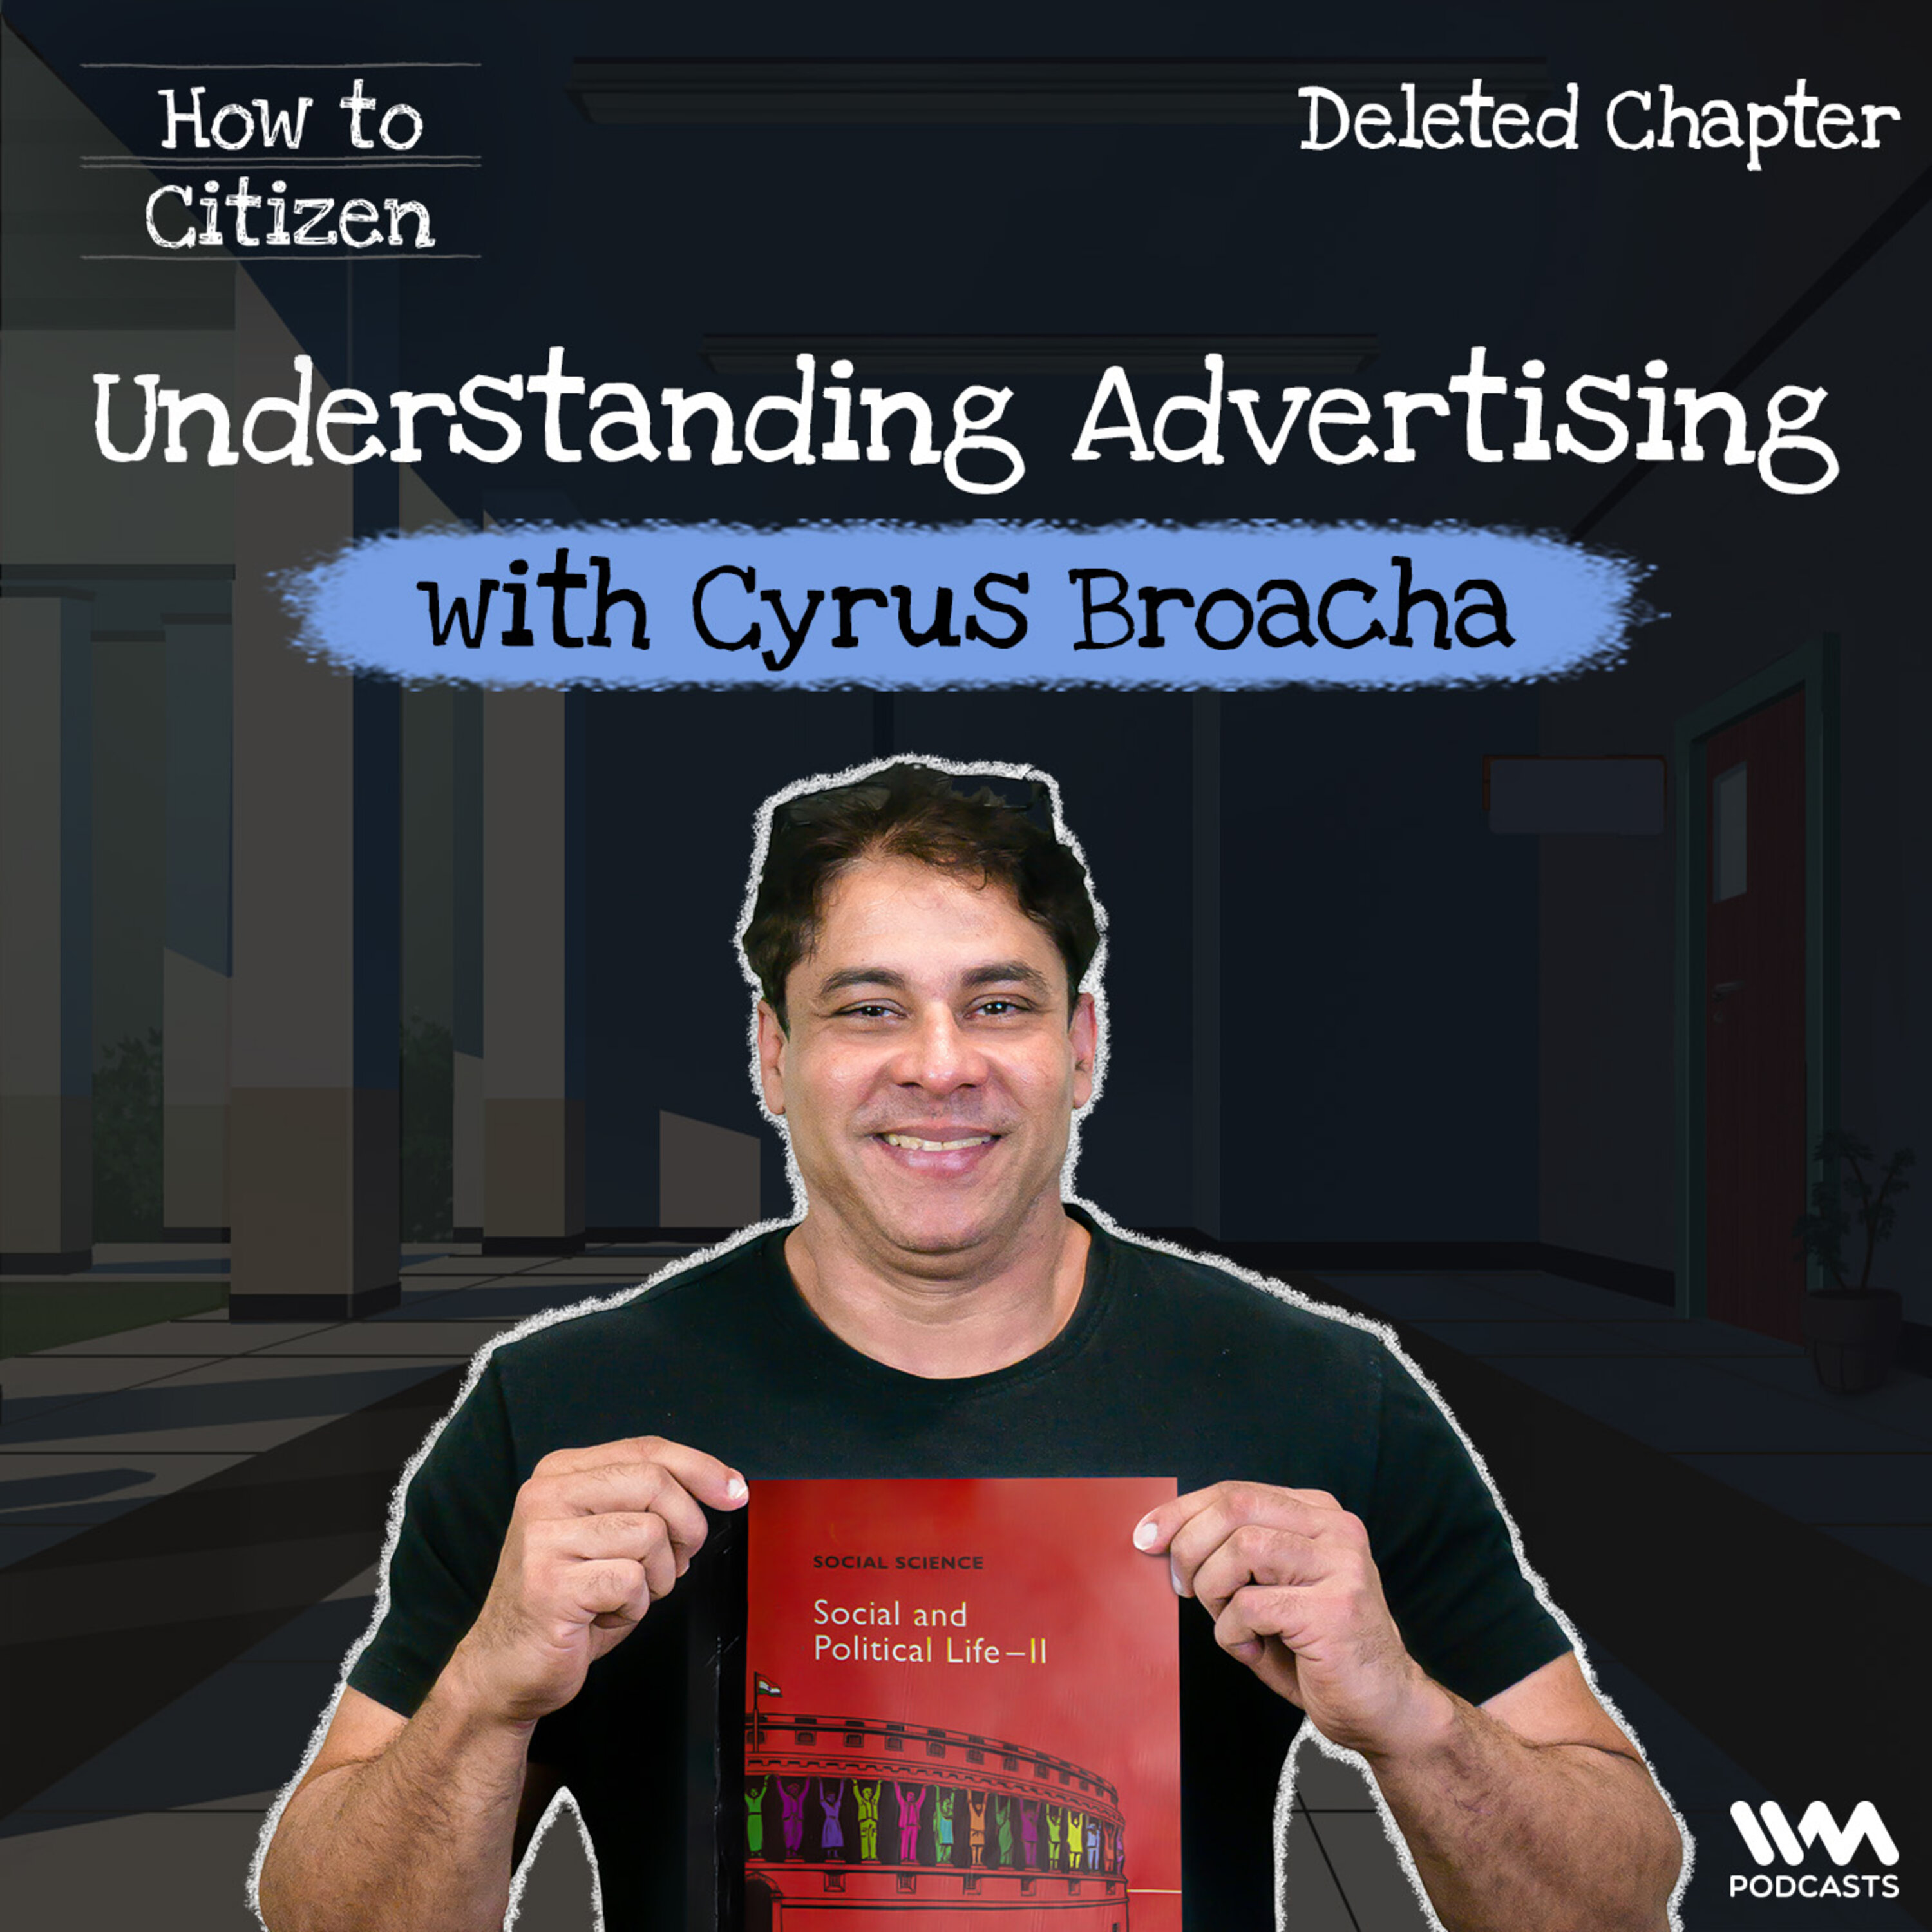 Deleted Chapter: Understanding Advertising with Cyrus Broacha | How To Citizen